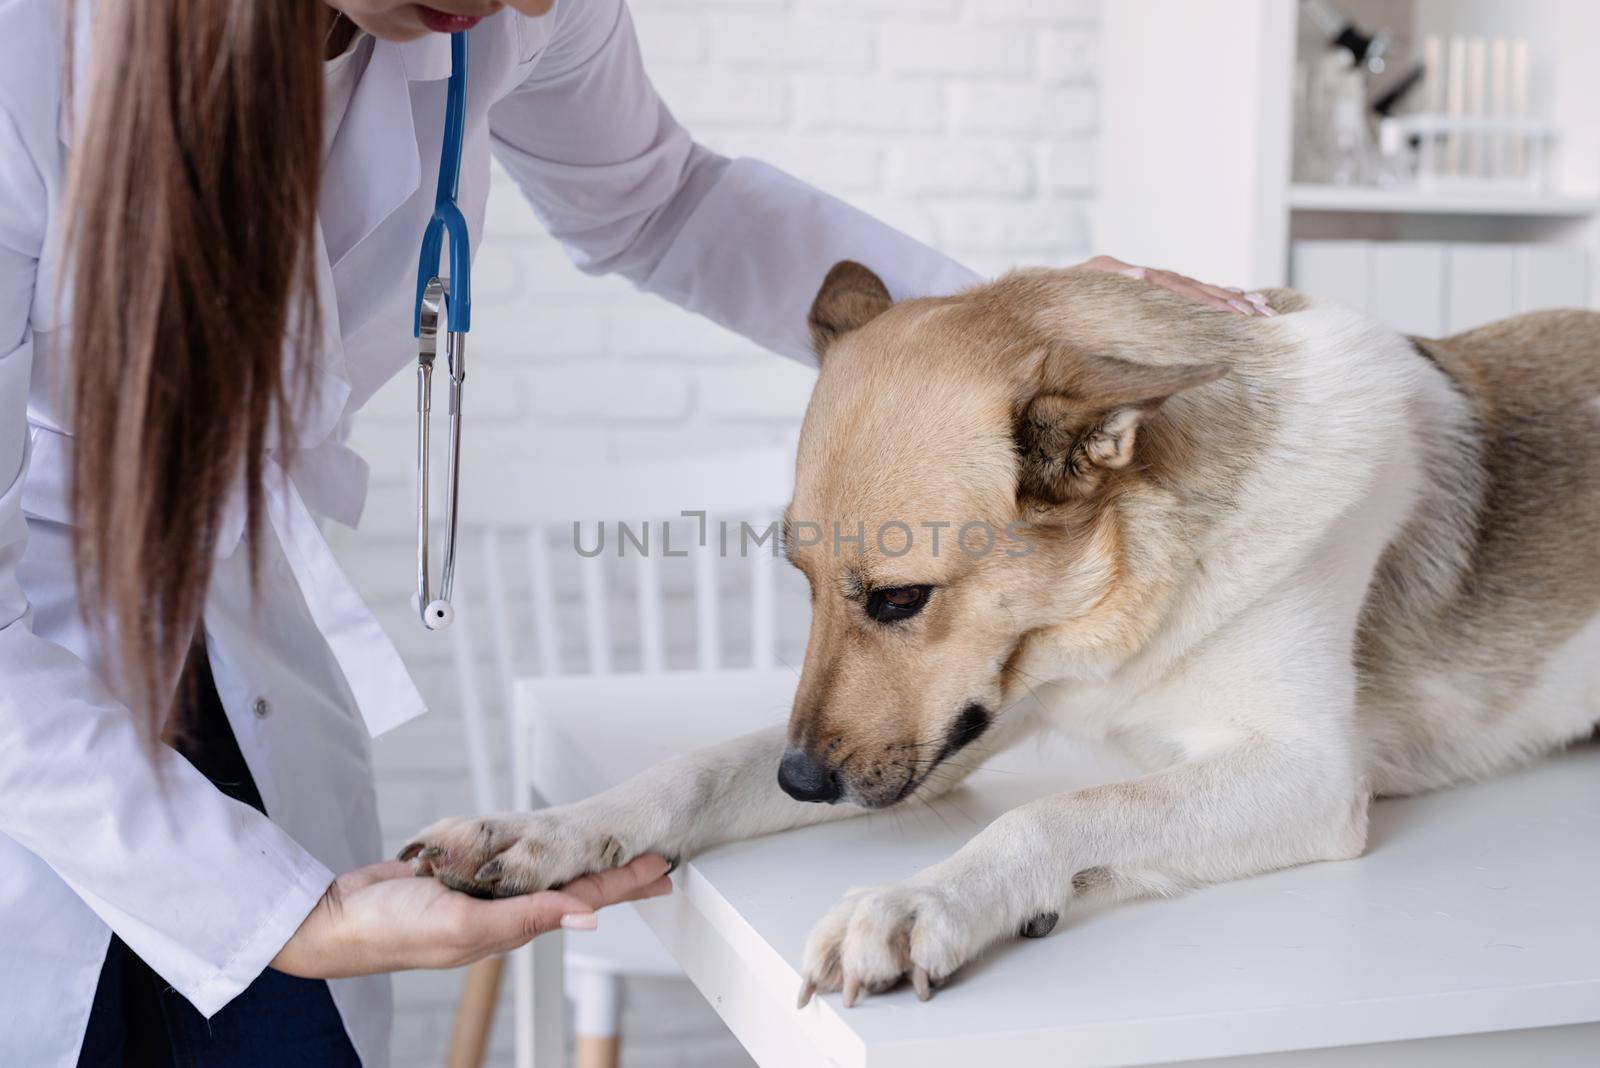 Vet examining dog. Puppy at veterinarian doctor. Animal clinic. Pet check up and vaccination. Health care.